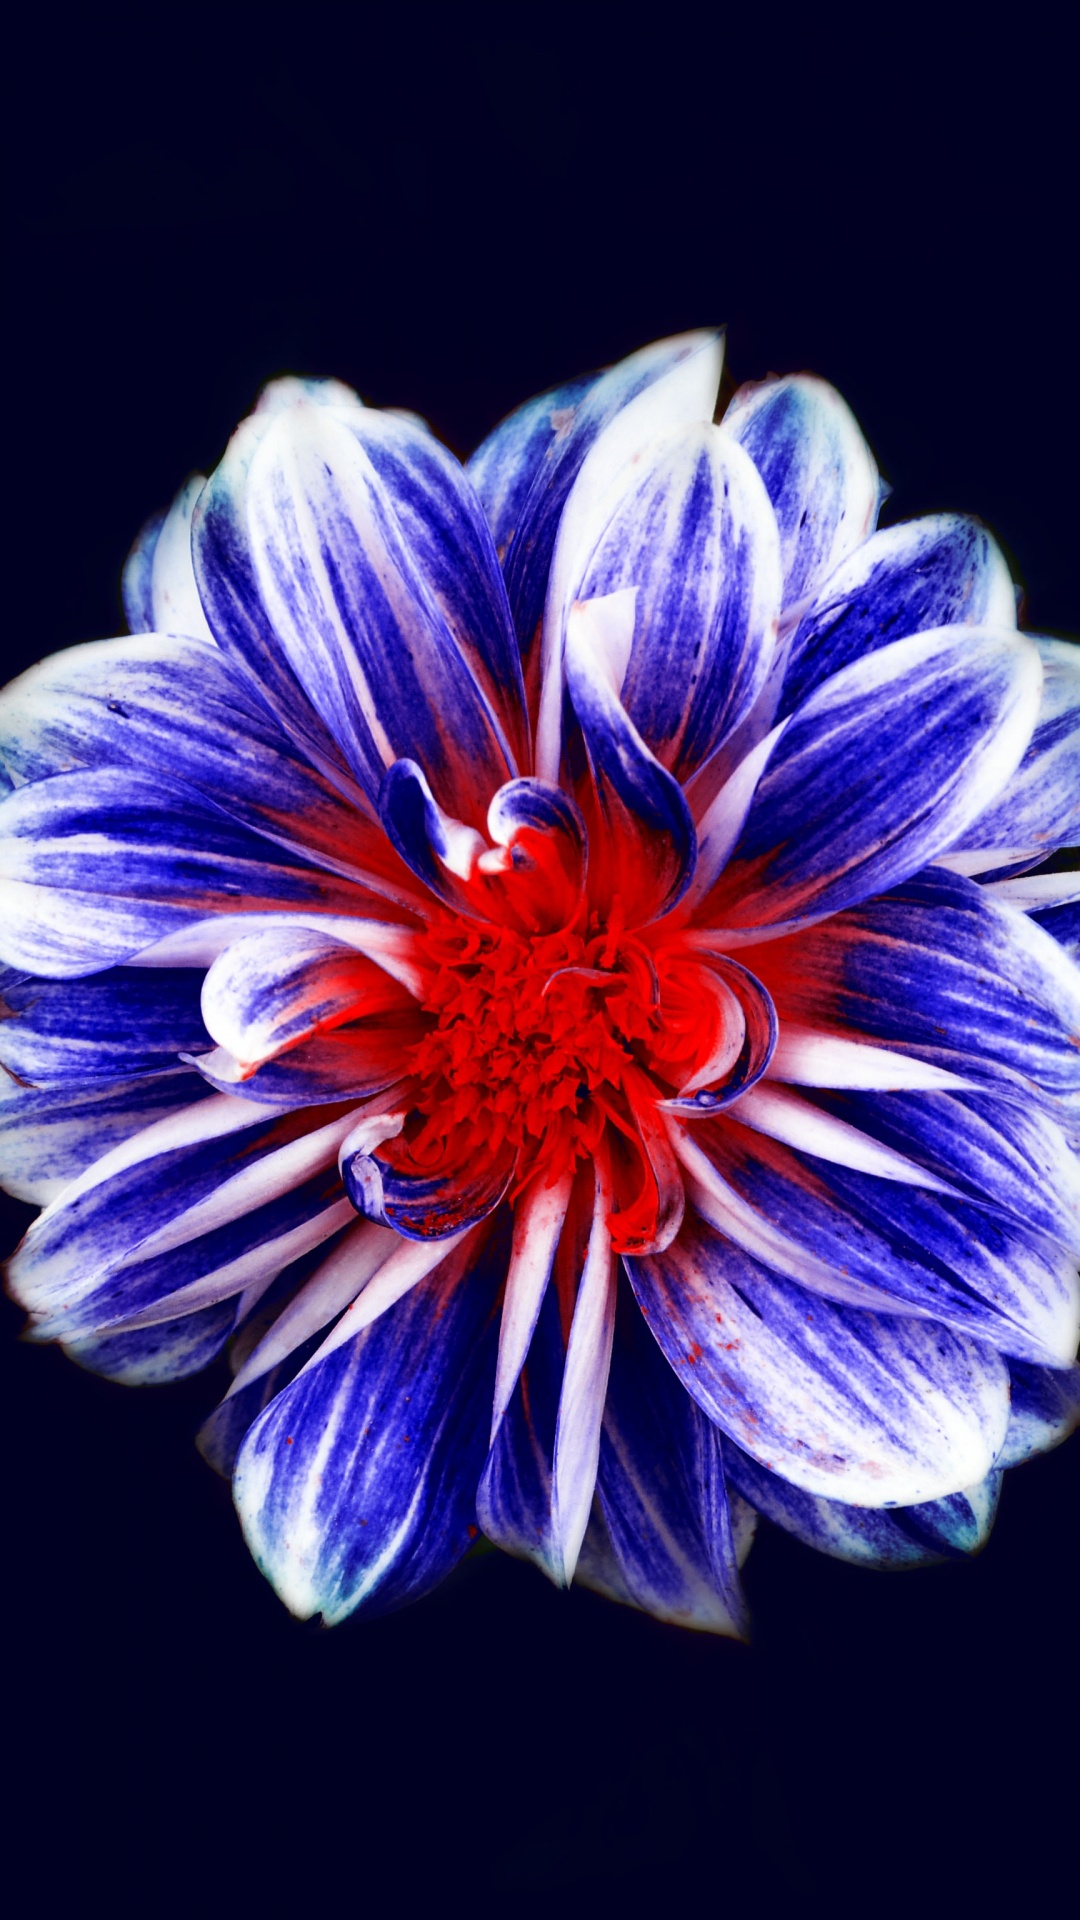 Purple and White Flower in Black Background. Wallpaper in 1080x1920 Resolution